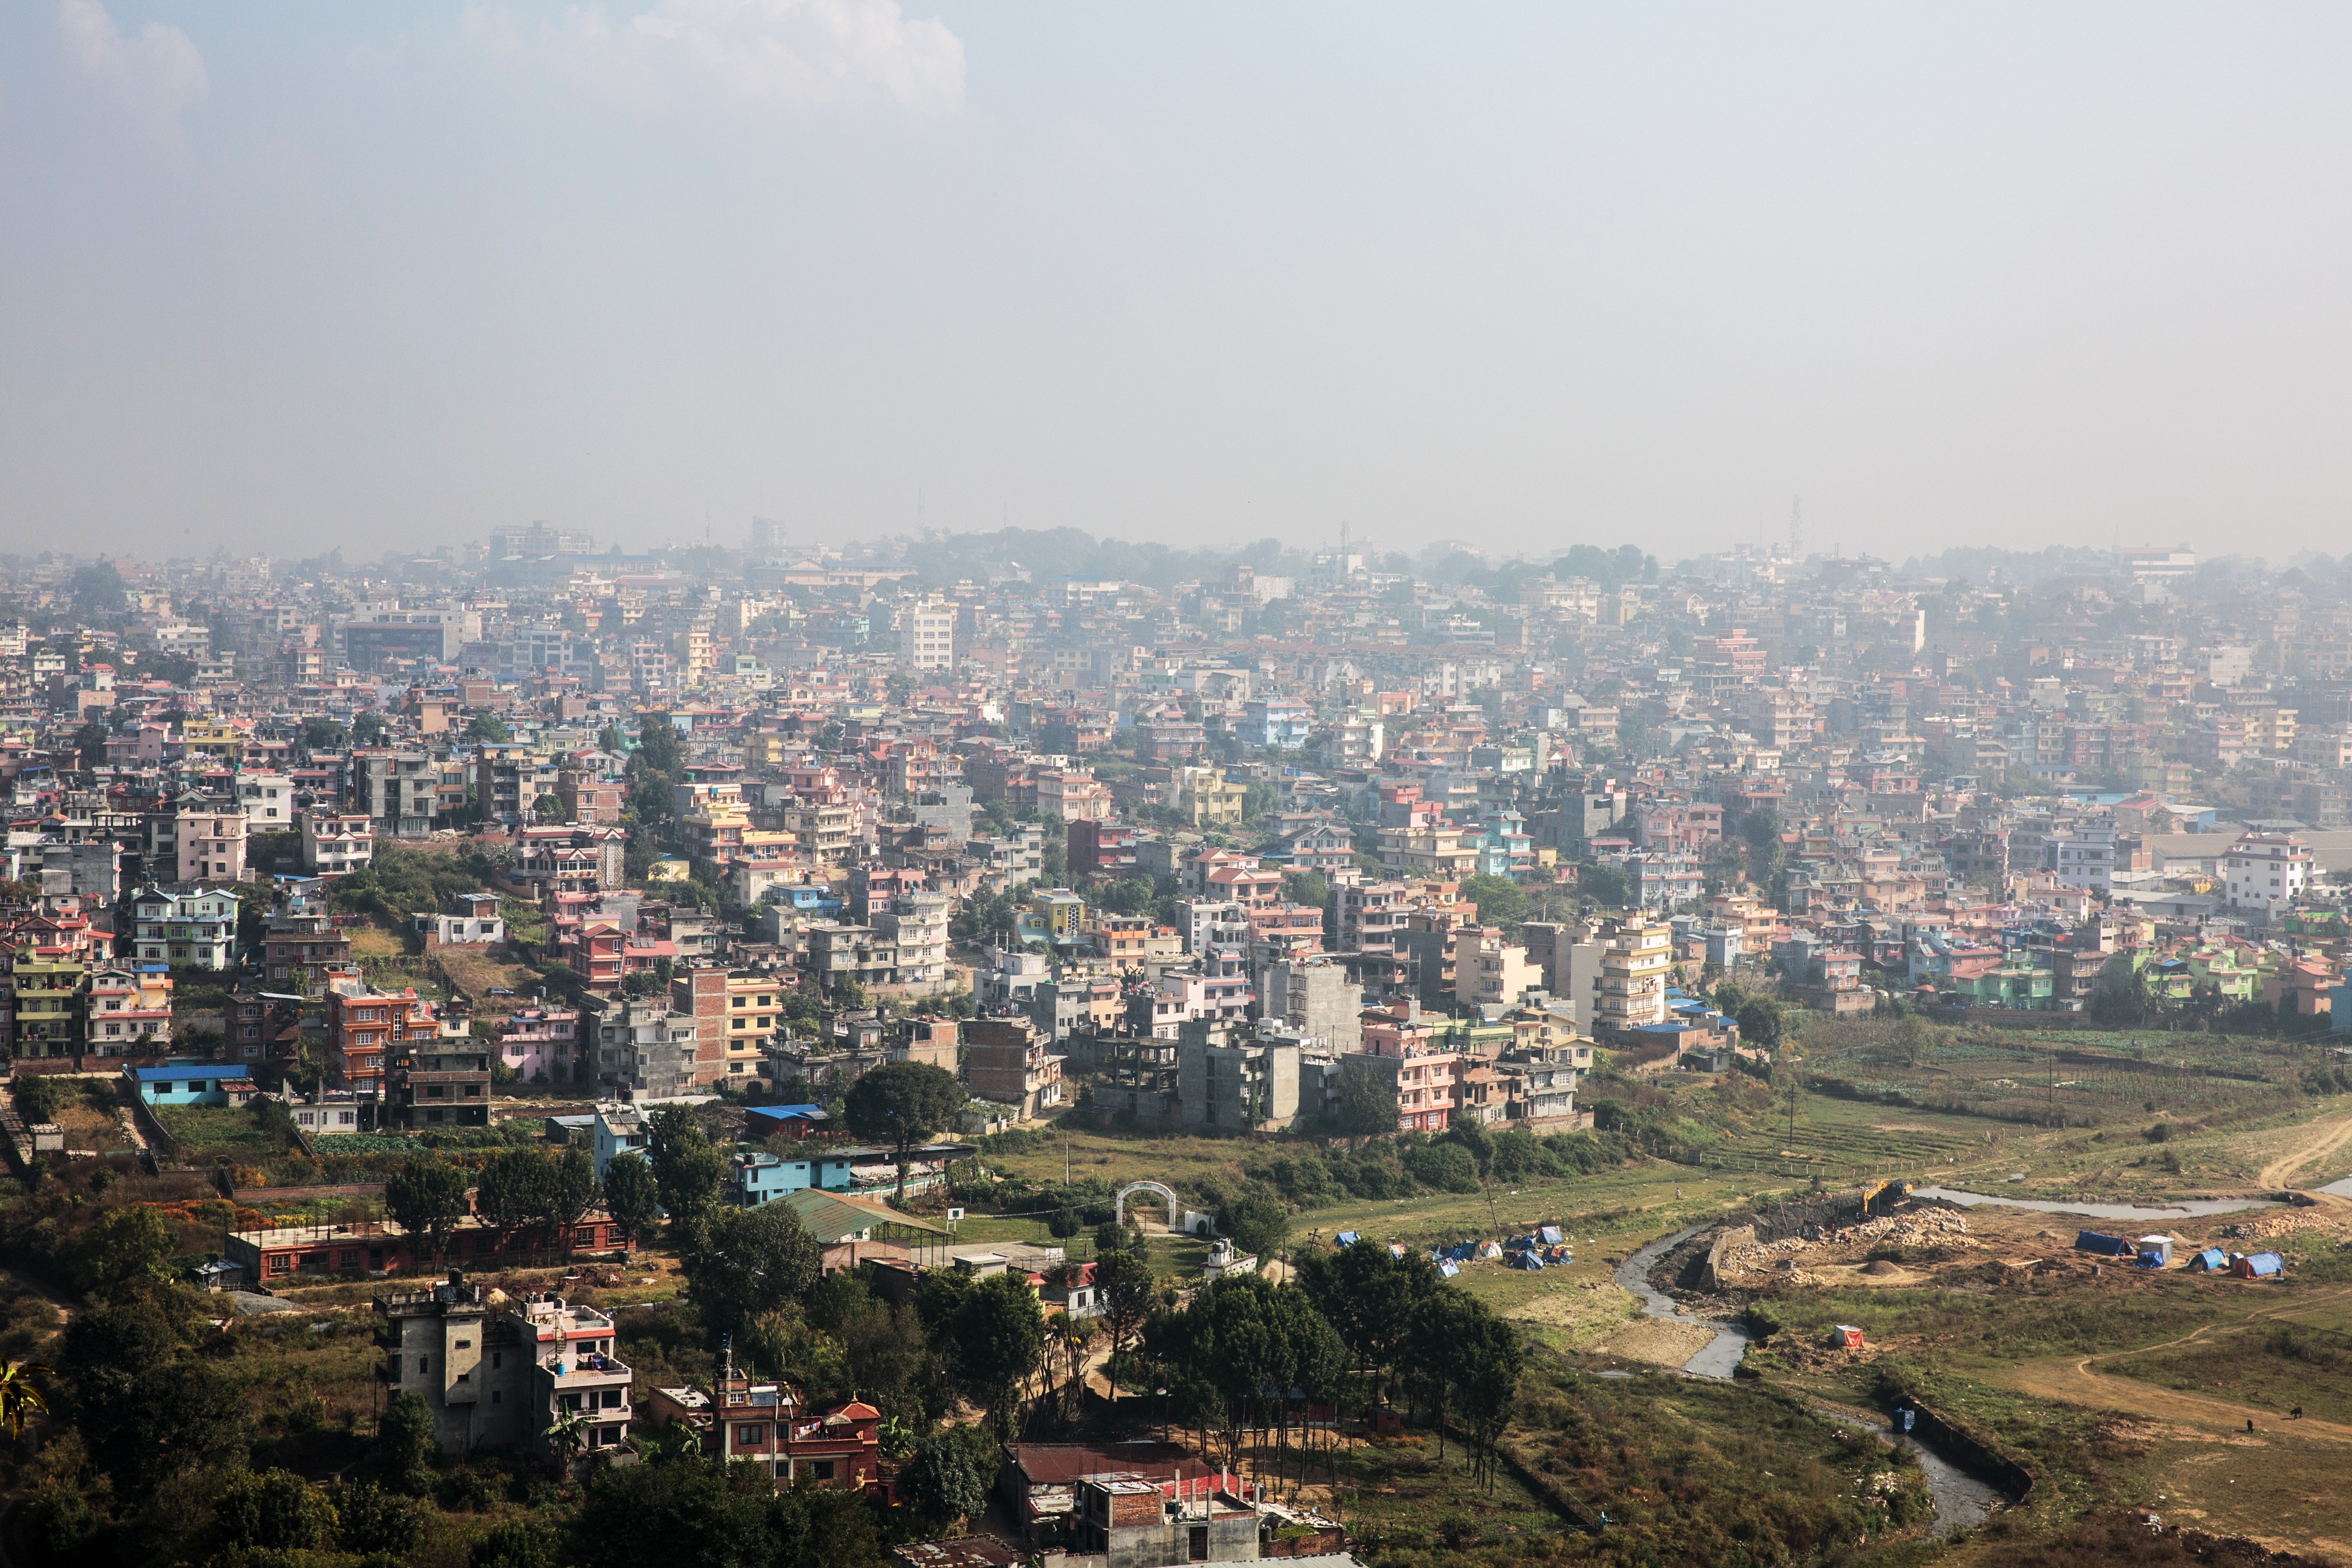 All sides will benefit if Kathmandu is able to engage constructively with both India and China. Photo: Bloomberg